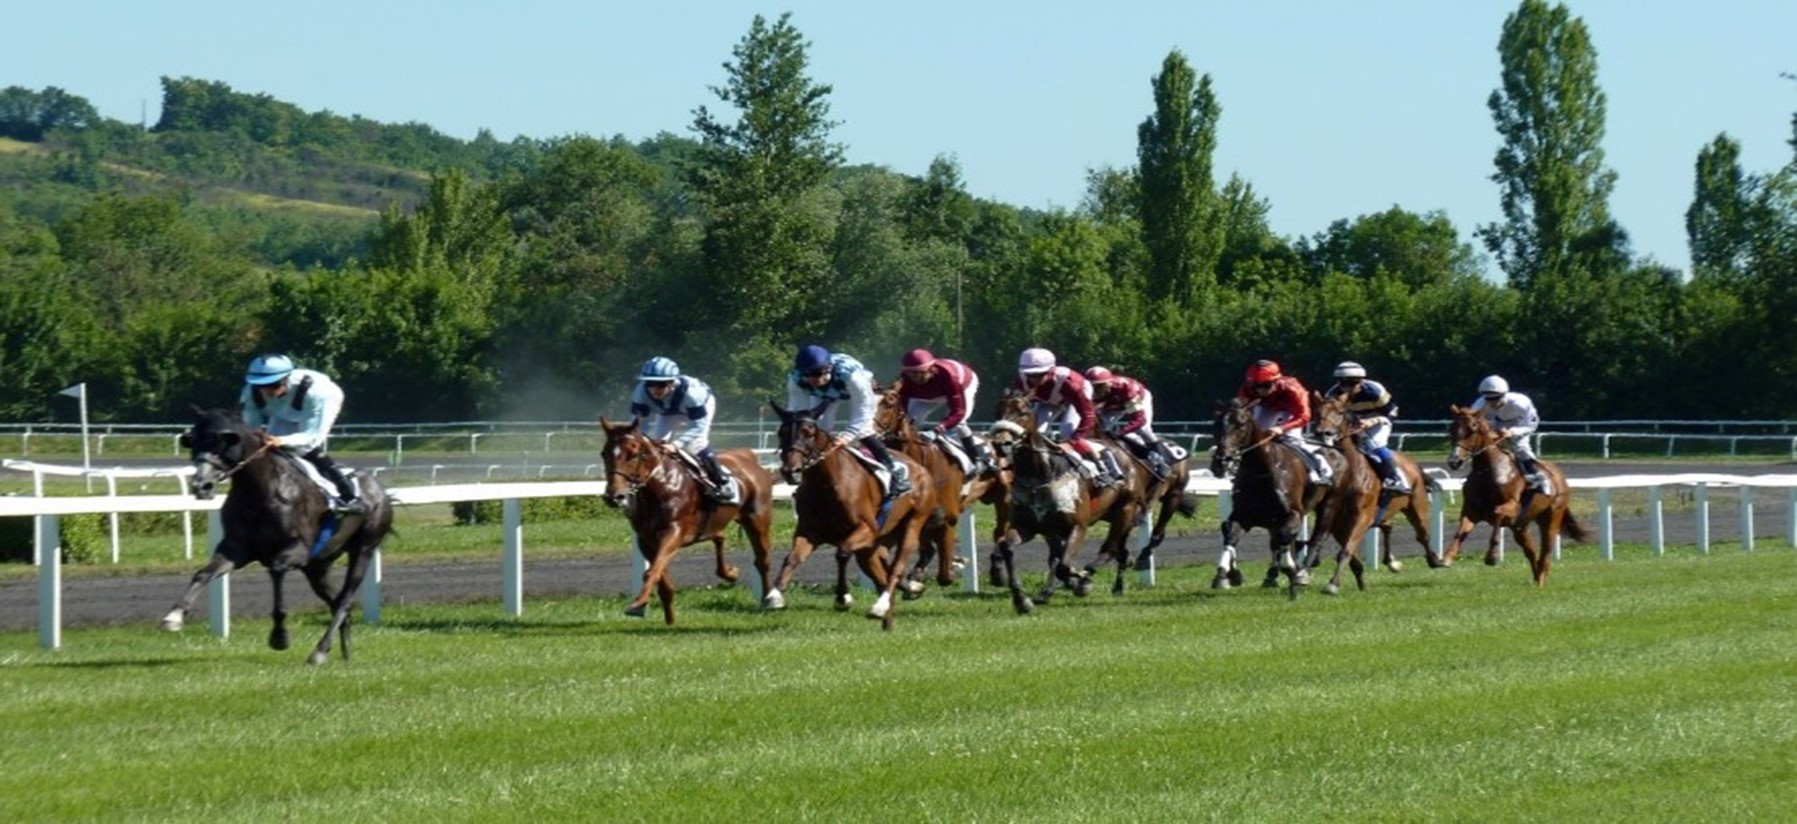 Betting on Speed: Online Horse Racing Odds and Strategies